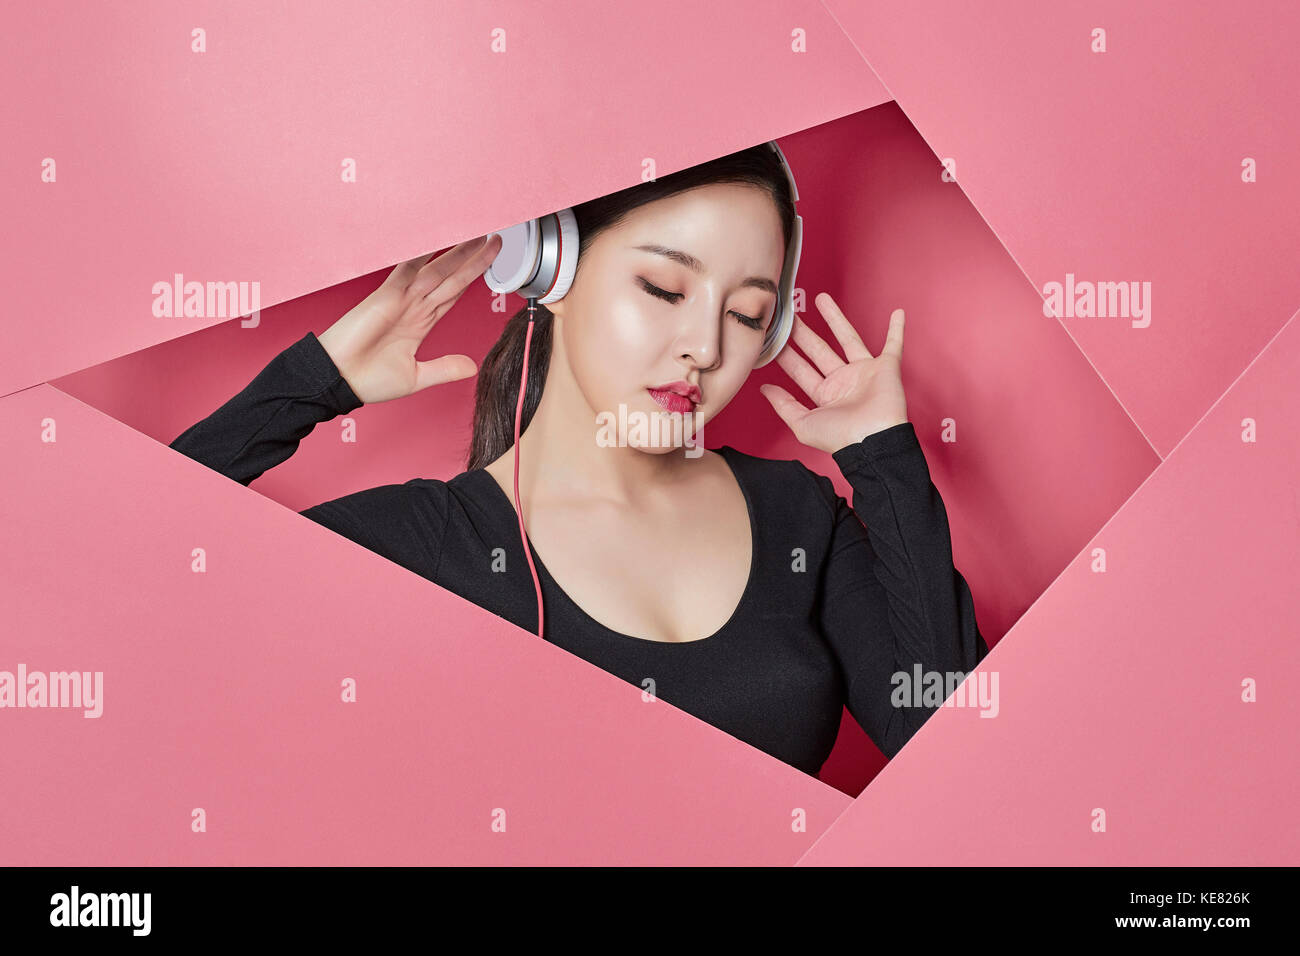 Portrait of young woman listening to music Banque D'Images